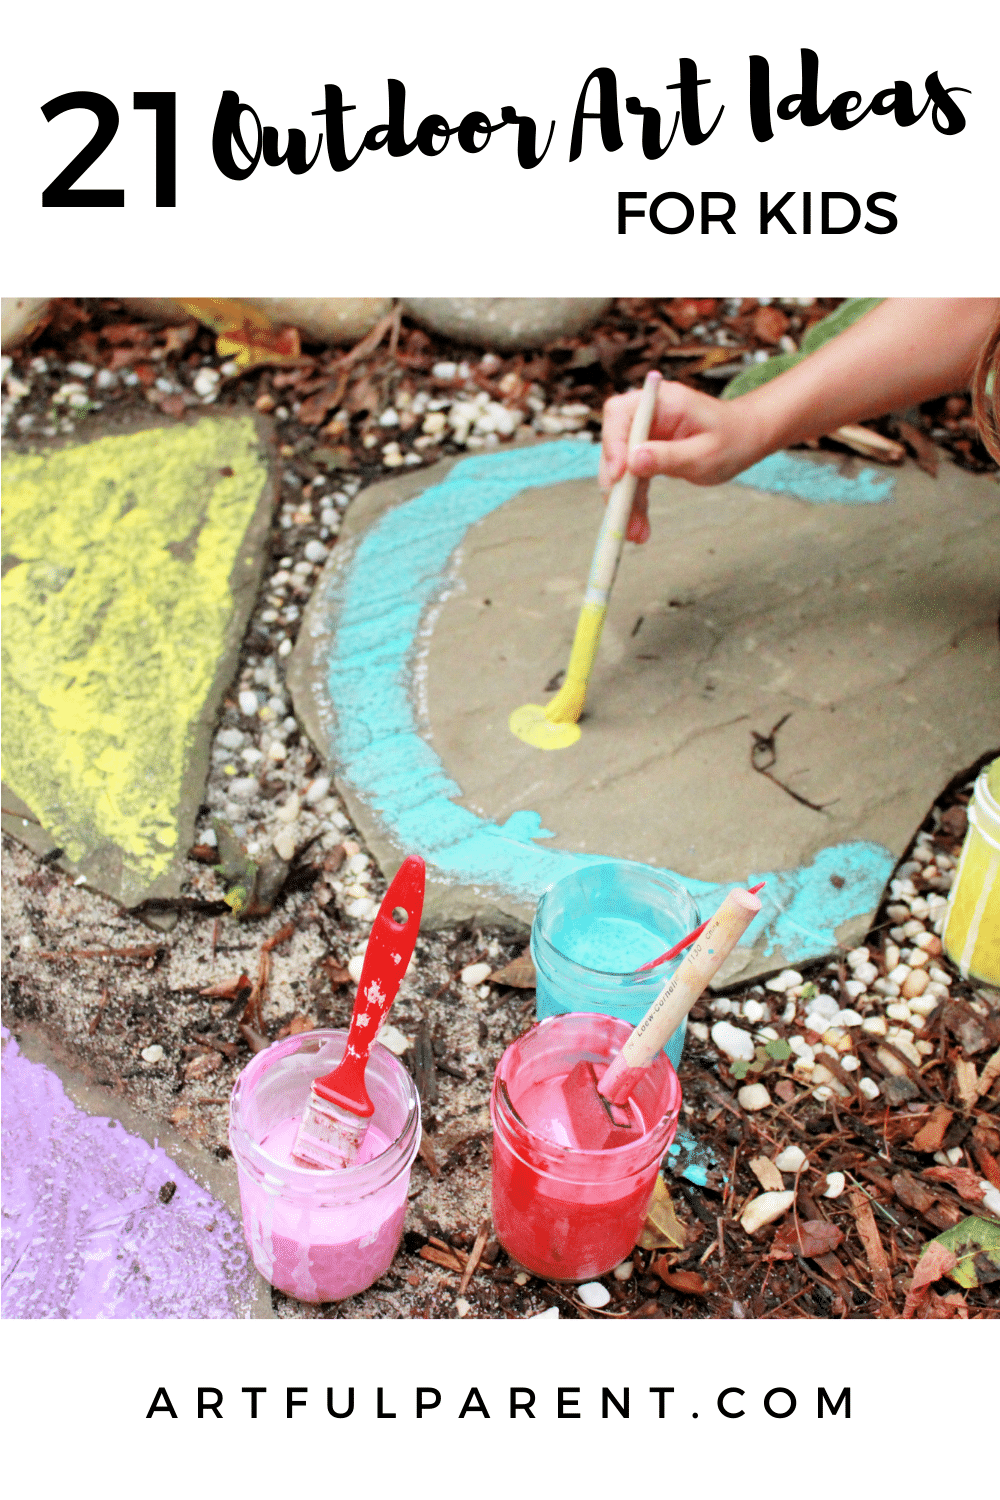 21 Outdoor Art Ideas For Kids To Take The Creativity And Mess Outside